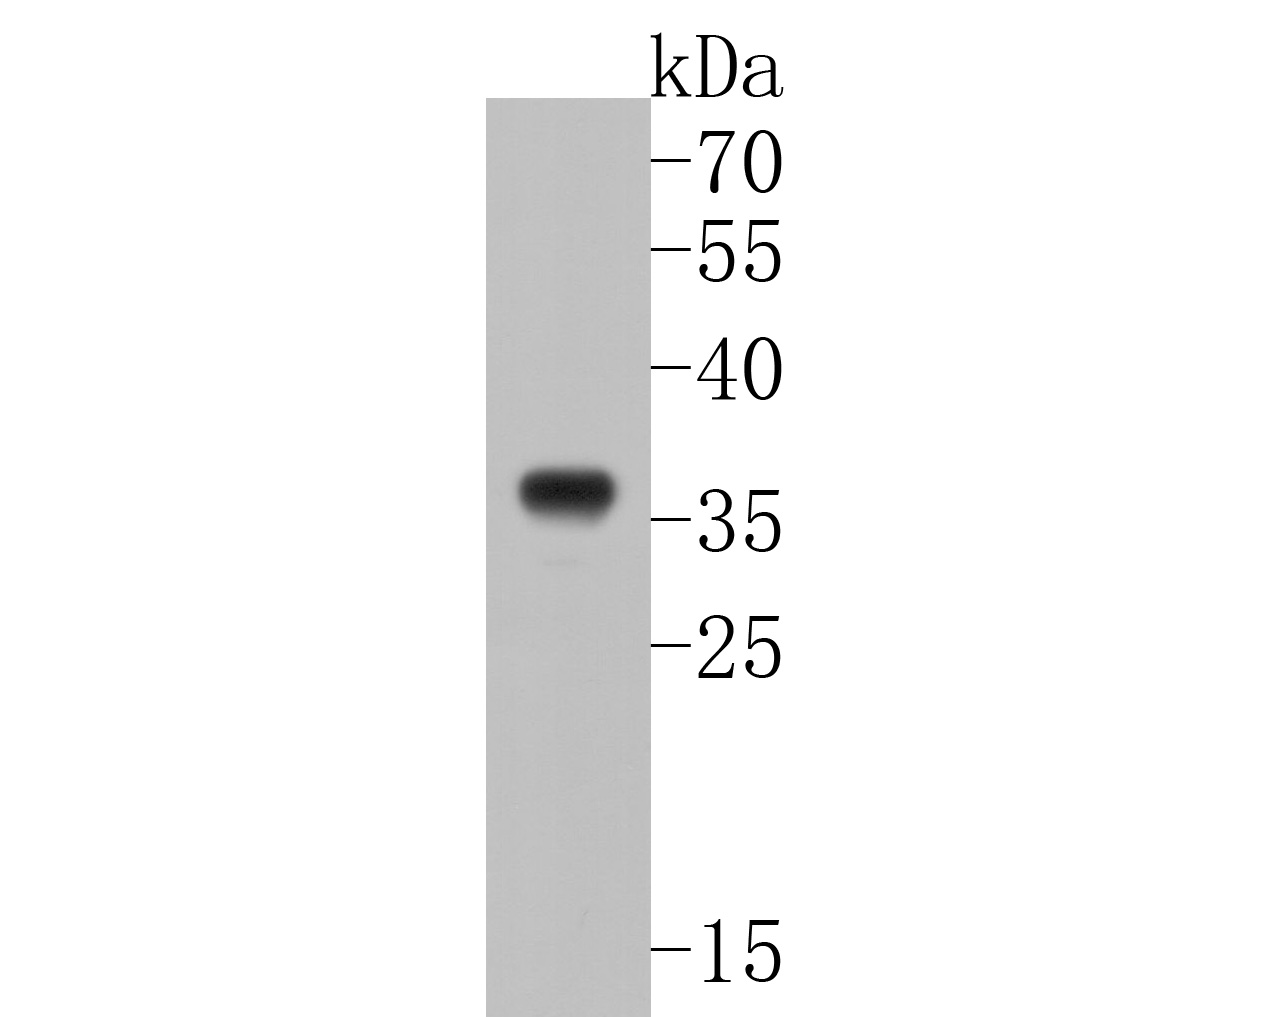 Western blot analysis of Myc-tag on N-terminal Myc-tagged recombinant protein lysates. Proteins were transferred to a PVDF membrane and blocked with 5% BSA in PBS for 1 hour at room temperature. The primary antibody (EM1902-38, 1/5,000) was used in 5% BSA at room temperature for 2 hours. Goat Anti-Rabbit IgG - HRP Secondary Antibody (HA1006) at 1:20,000 dilution was used for 1 hour at room temperature.